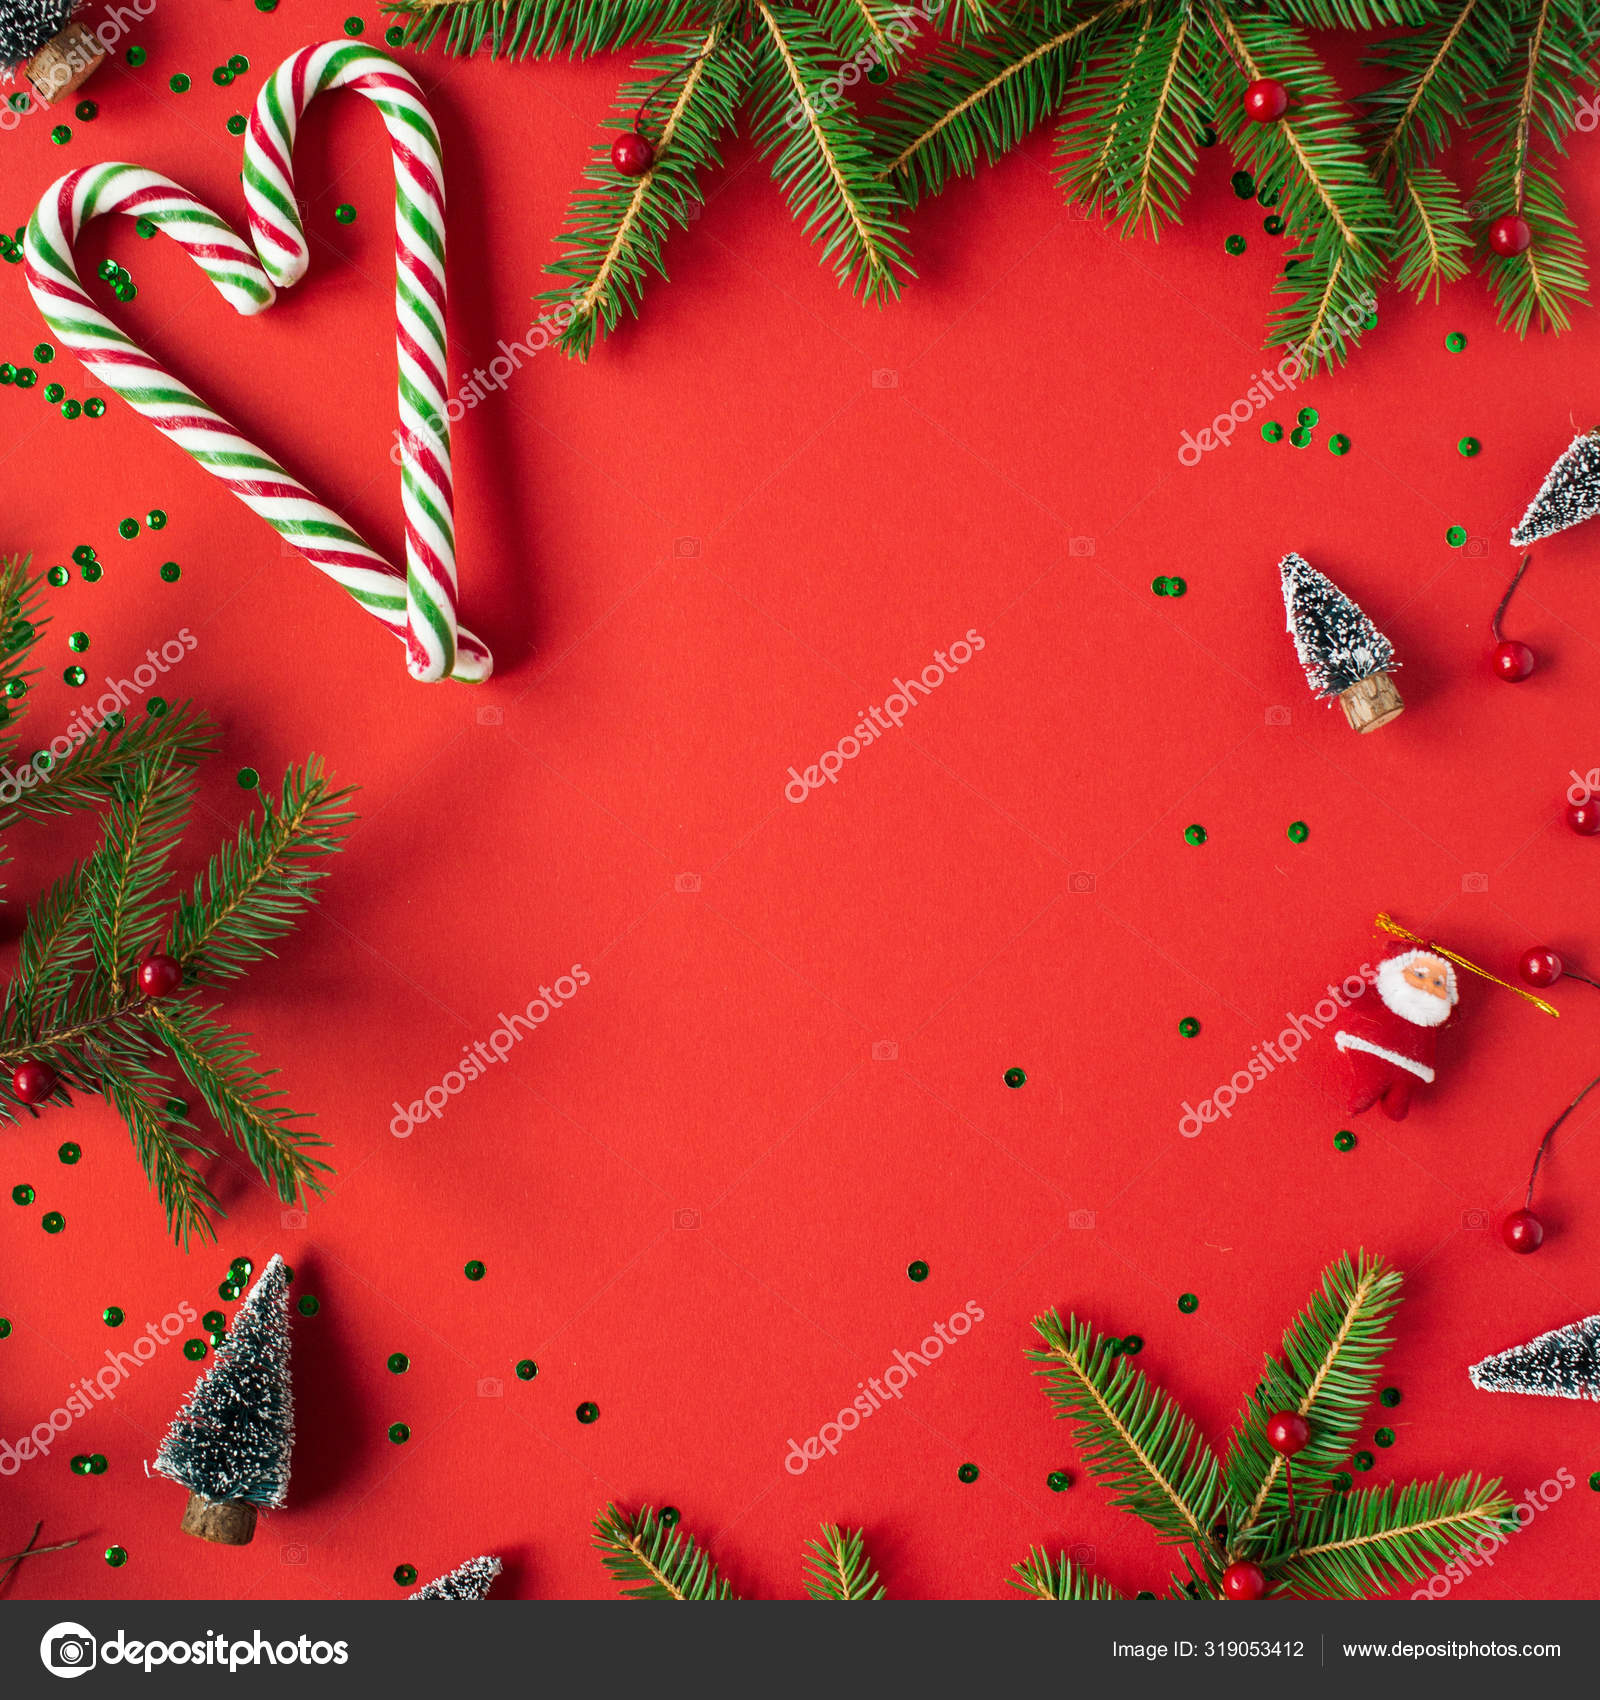 Christmas Background Red Images Royalty Free Stock Christmas Background Red Photos Pictures Depositphotos